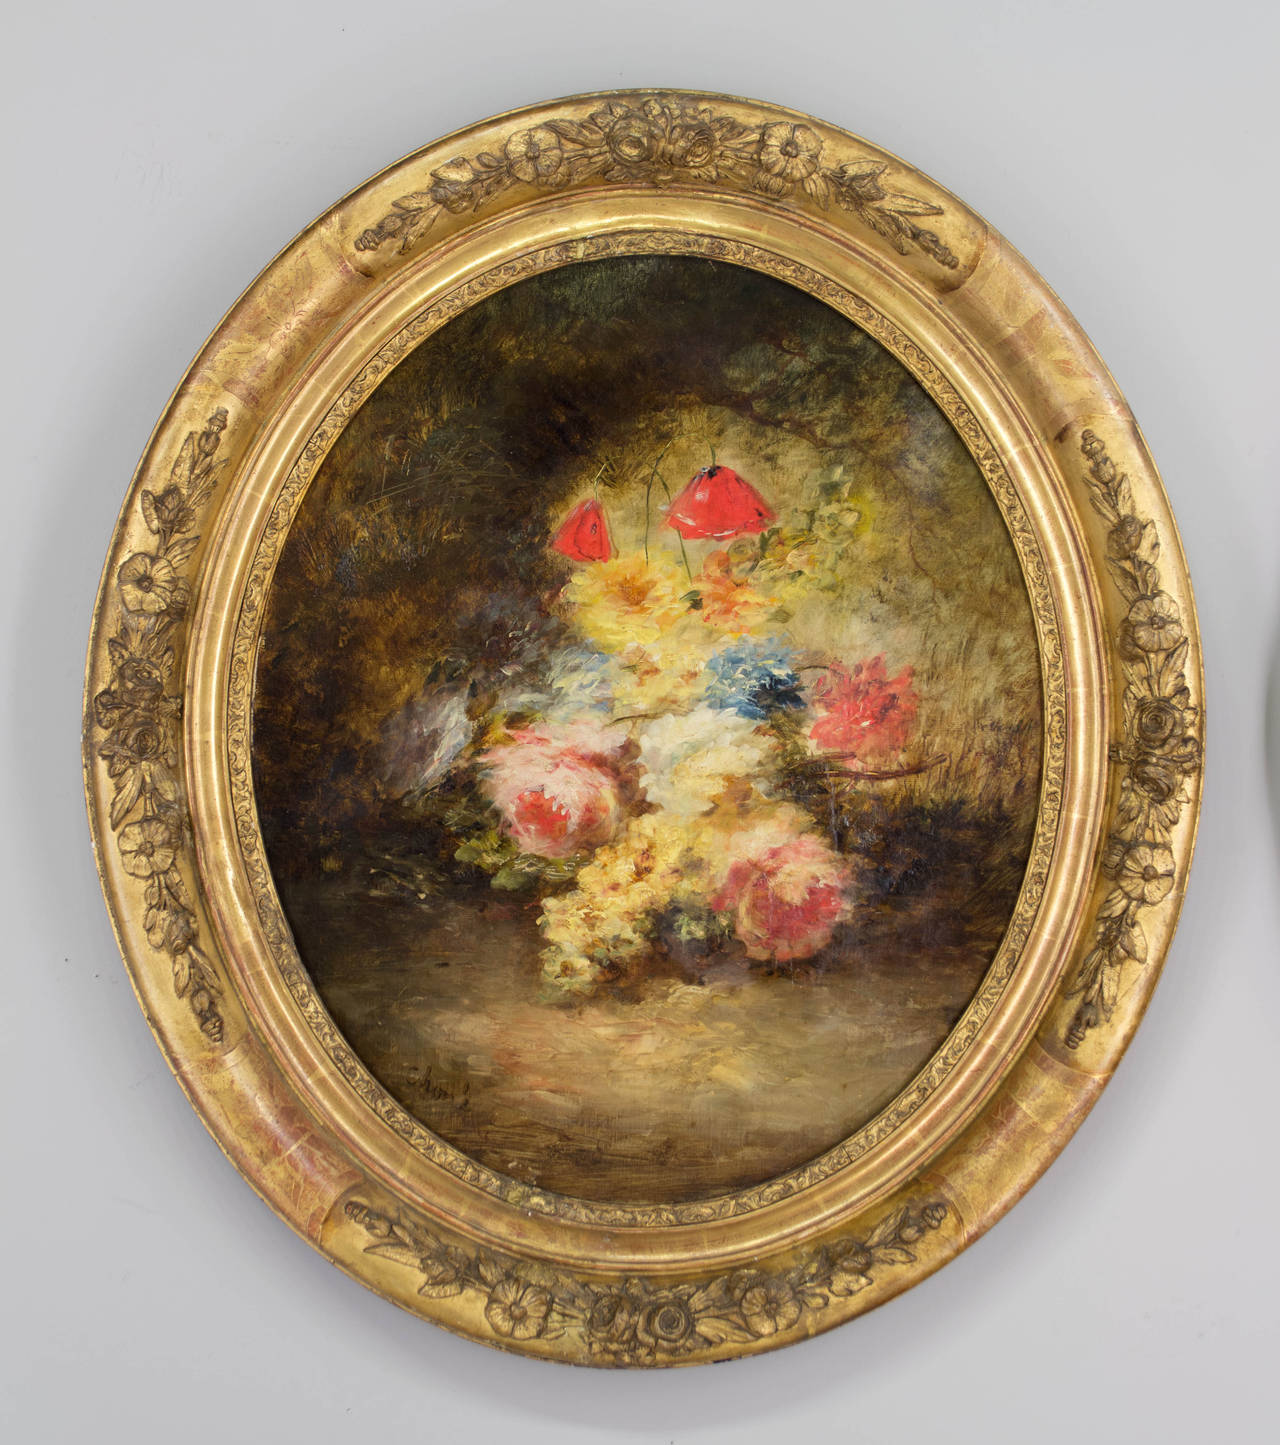 Pair of 19th c. French School colorful, decorative floral oil paintings in original carved and gilded oval frames. Artist signature lower left  Illegible.
Each canvas has been restored. Canvas size: 25